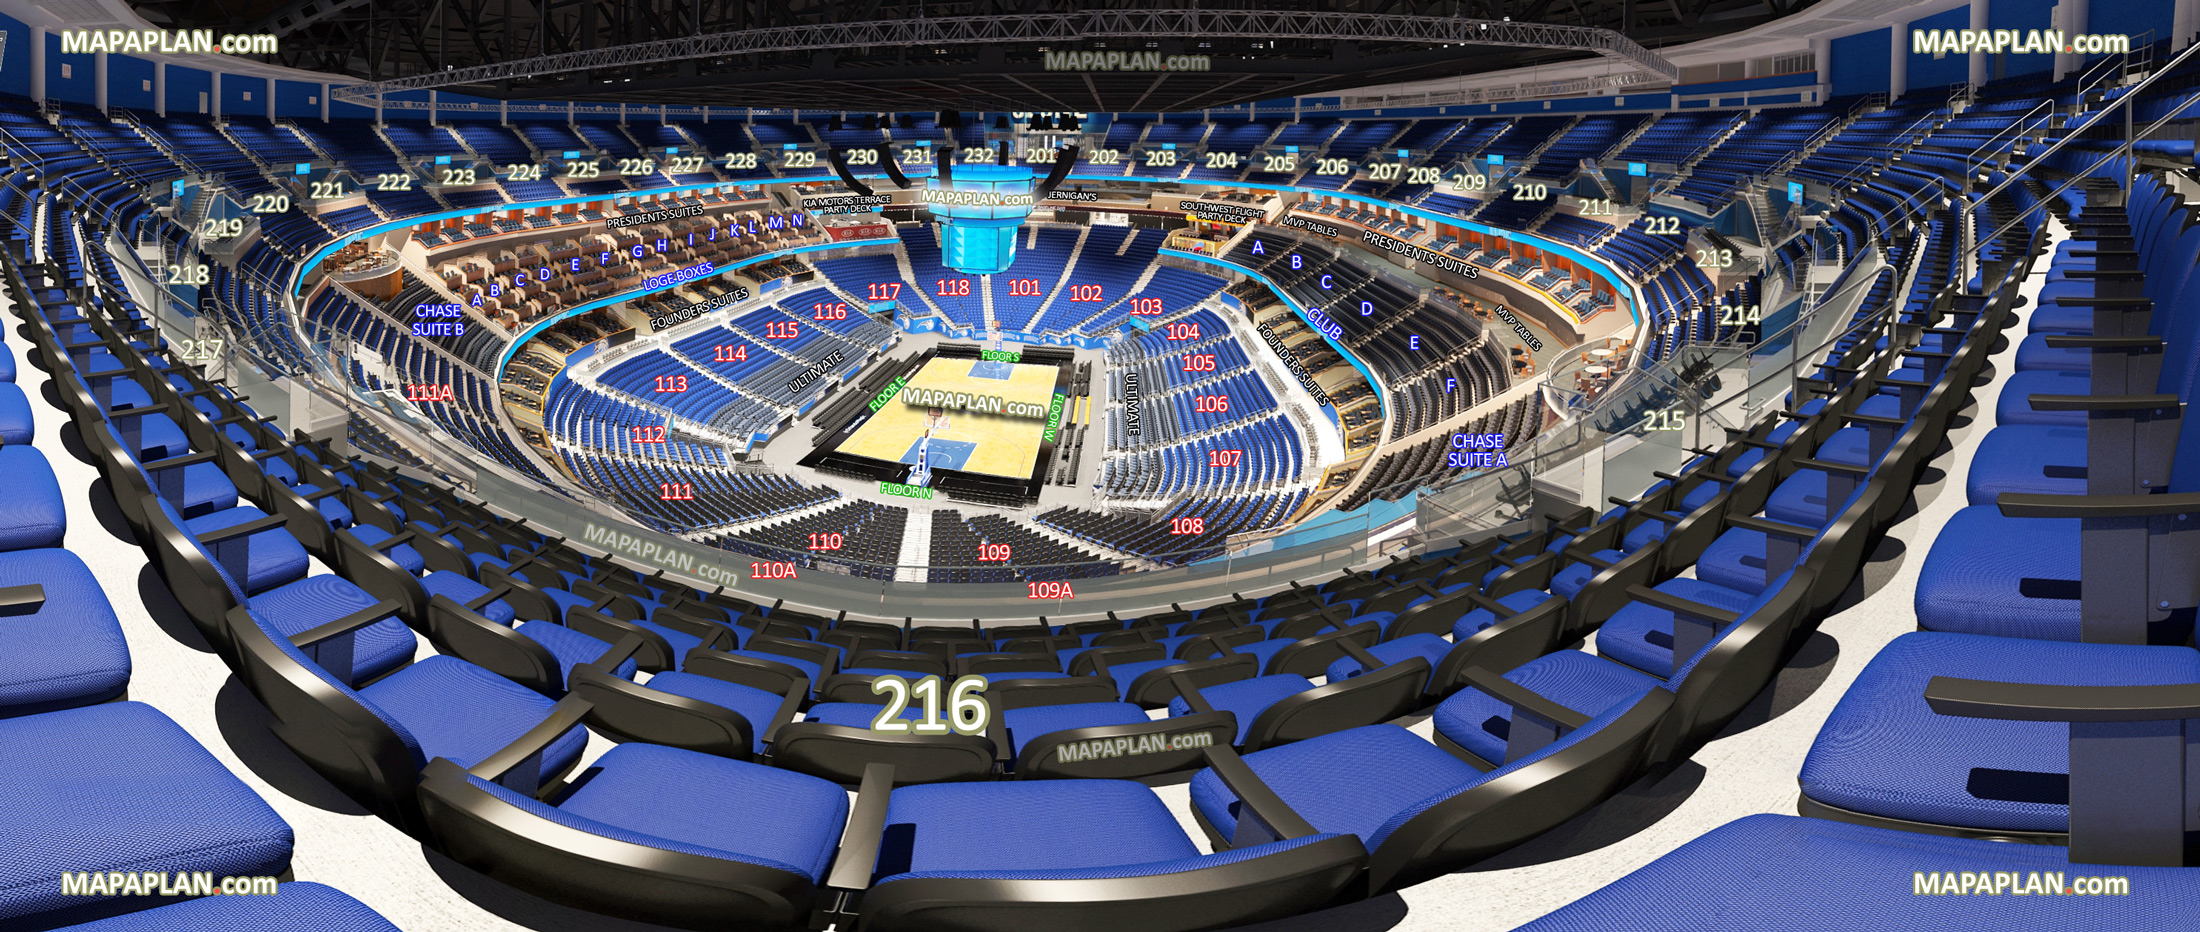 view section 216 row 12 seat 12 magic ncaa image chase club west level 100 terrace 200 promenade founders presidents suites loge box Orlando Kia Center seating chart